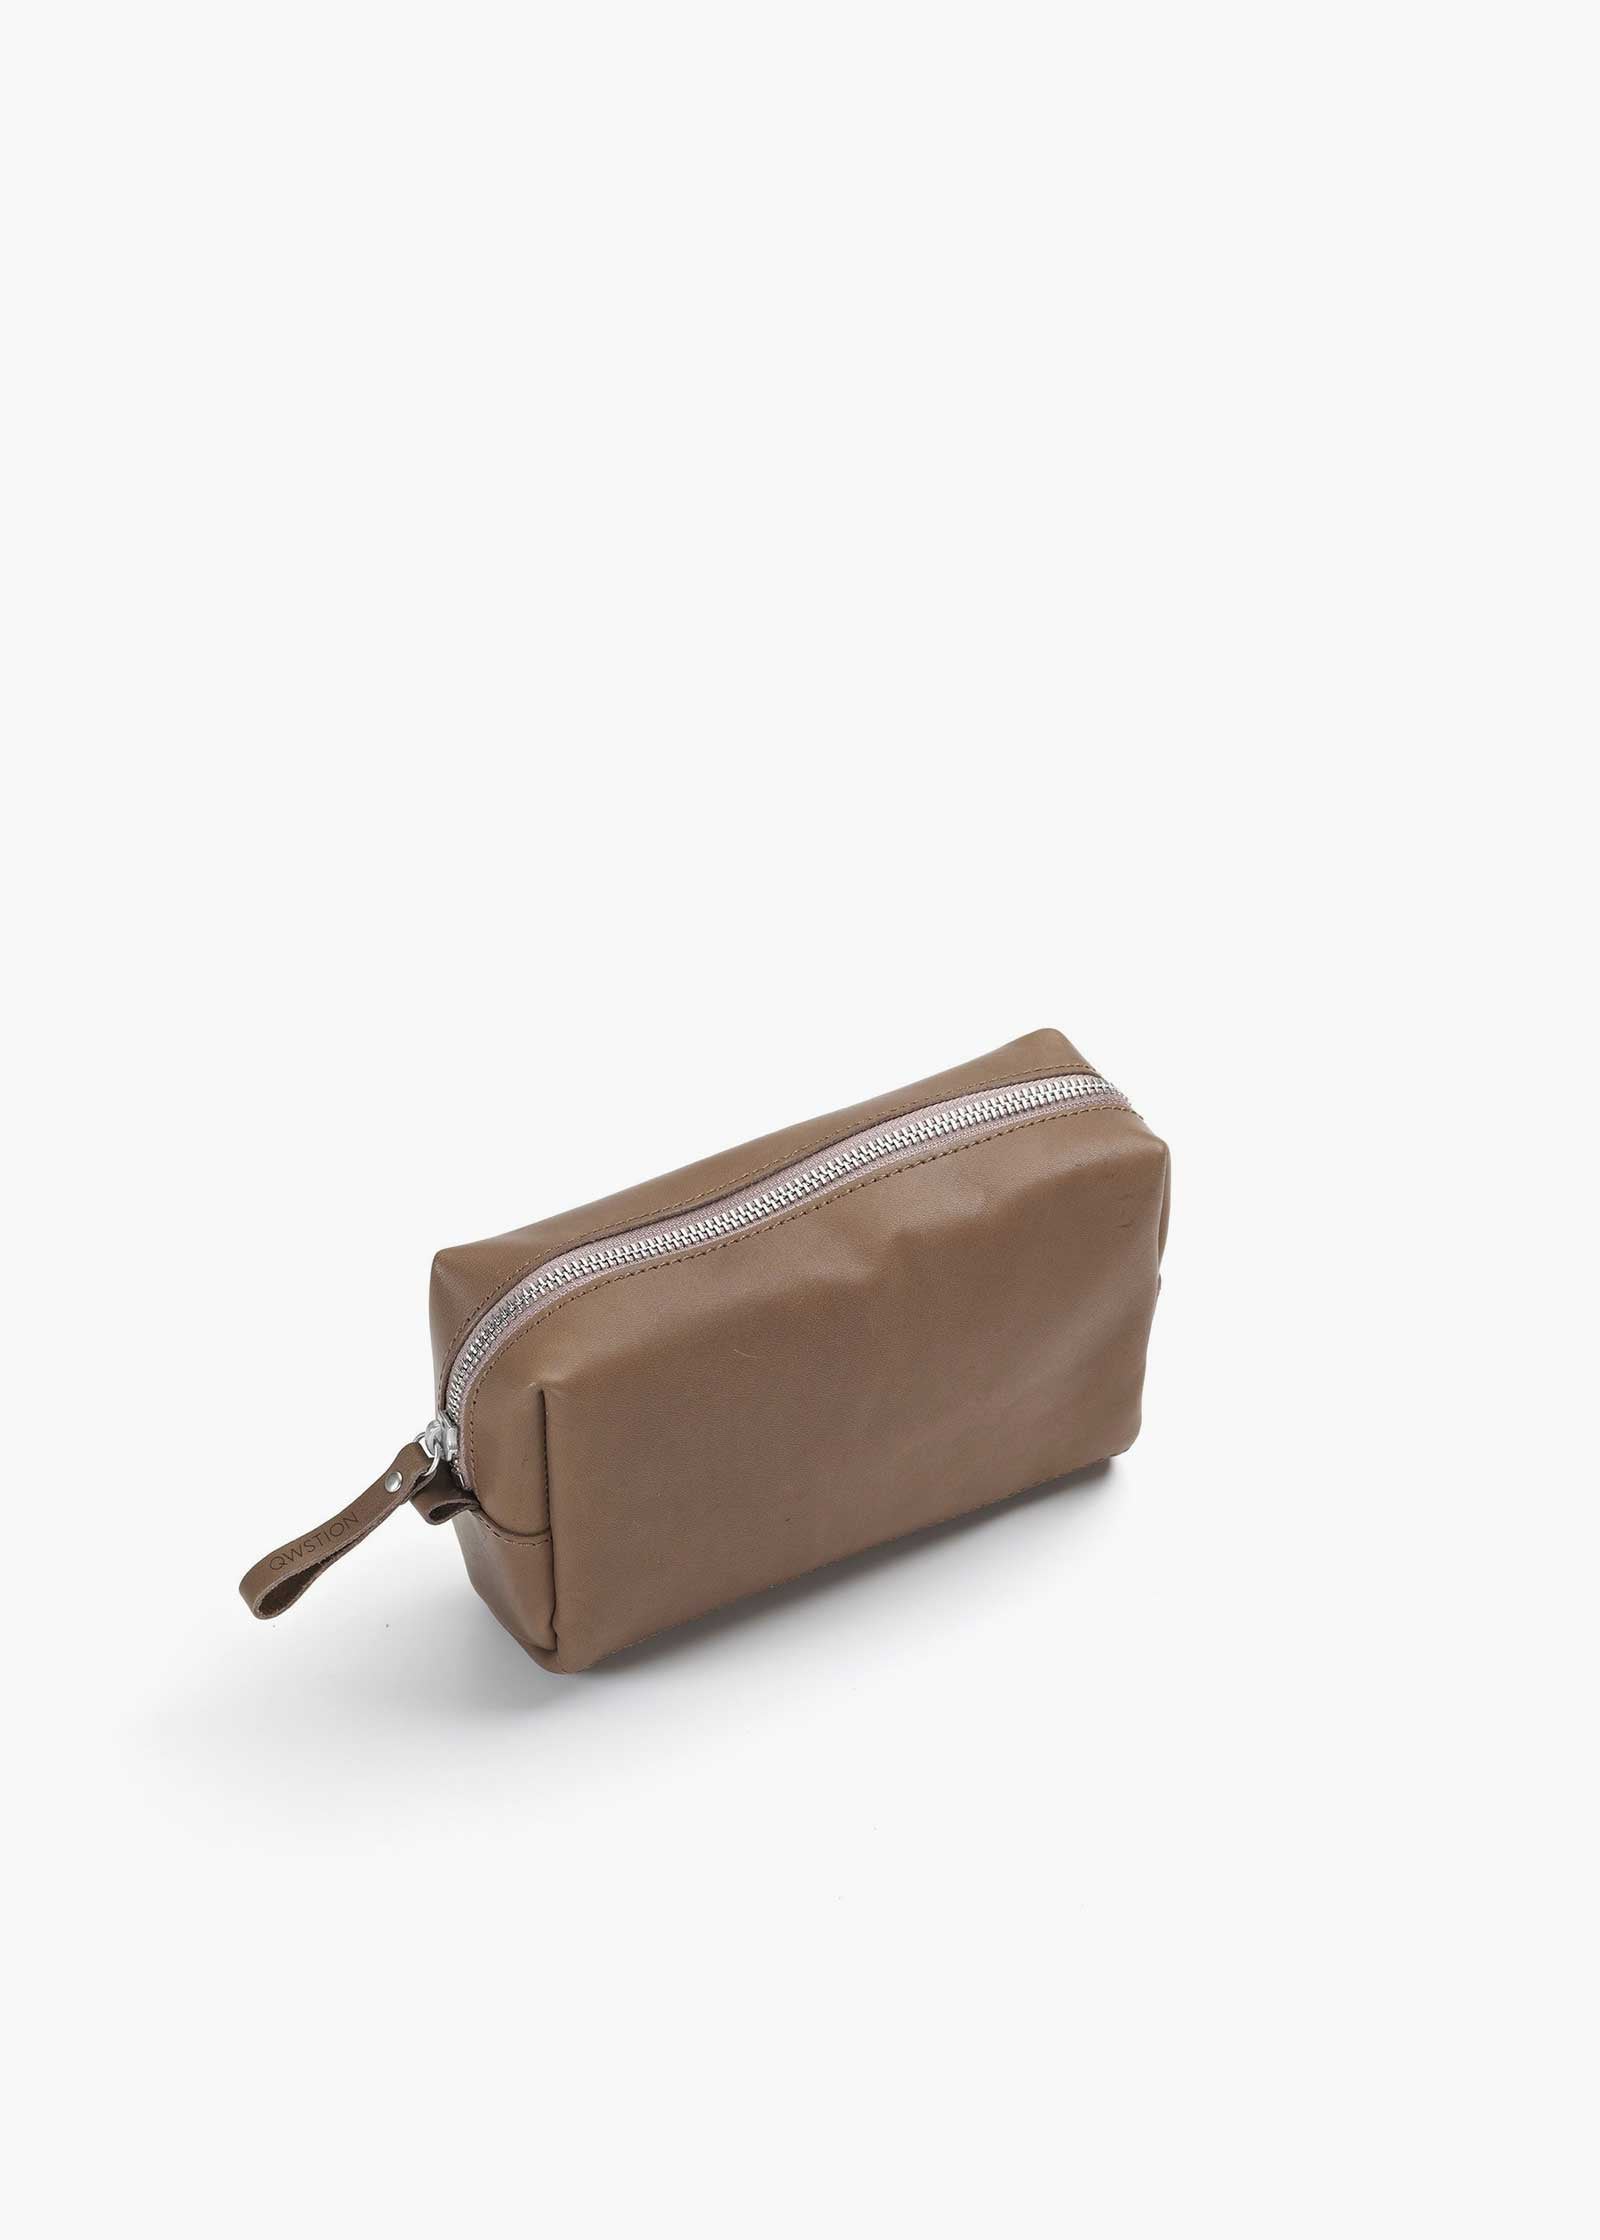 Amenity Pouch – Brown Leather Canvas